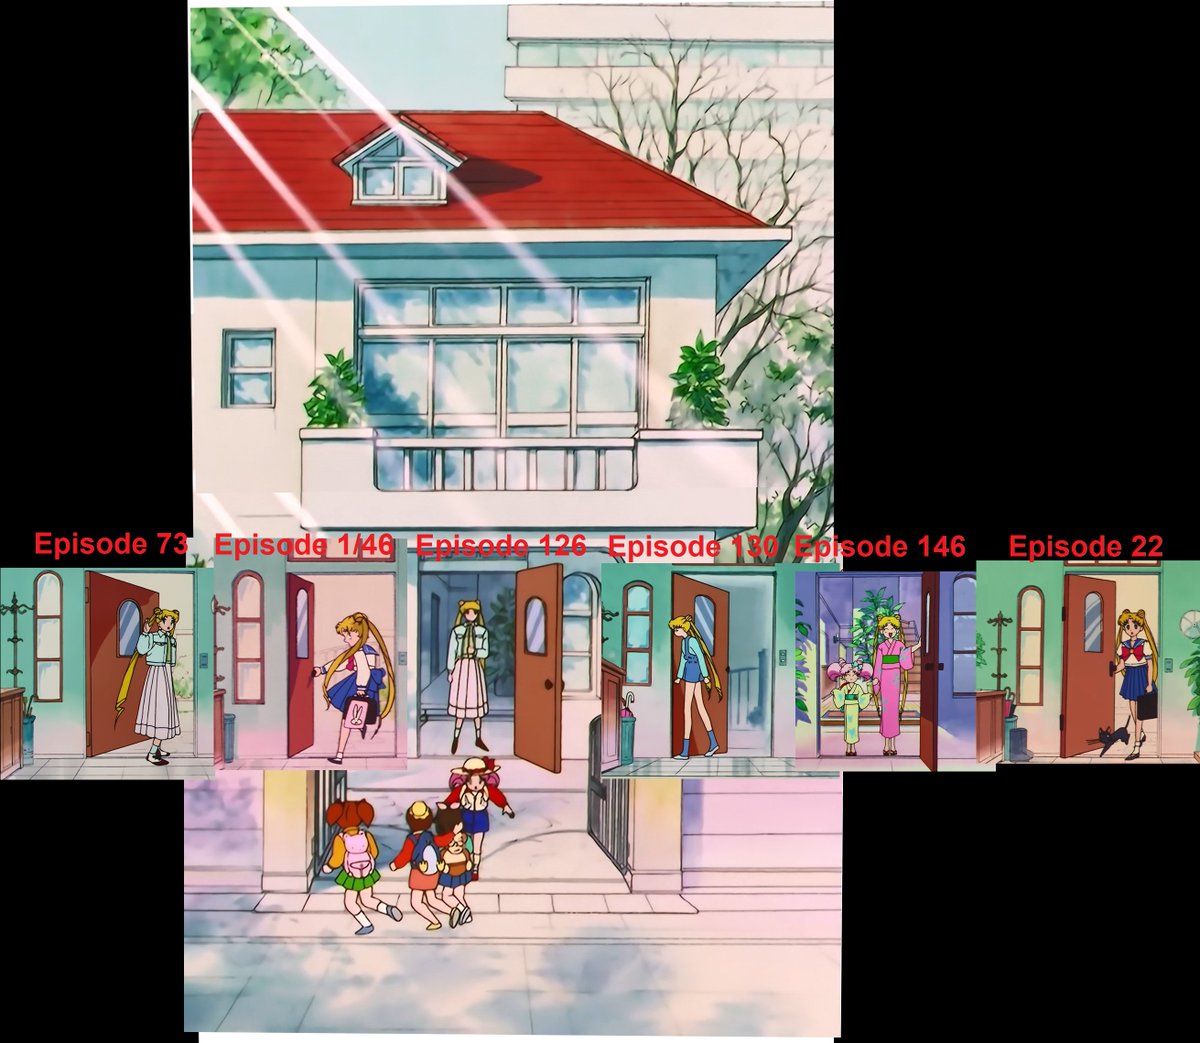 Lunar Archivist On Twitter Here S The Beginning Of An Attempt To Calculate The Size Of The Tsukino Residence Based On Usagi S Height Of 150 Cm 4 Feet 11 Inches And Comparisons From Inch and cm are used for measuring the distances. height of 150 cm 4 feet 11 inches